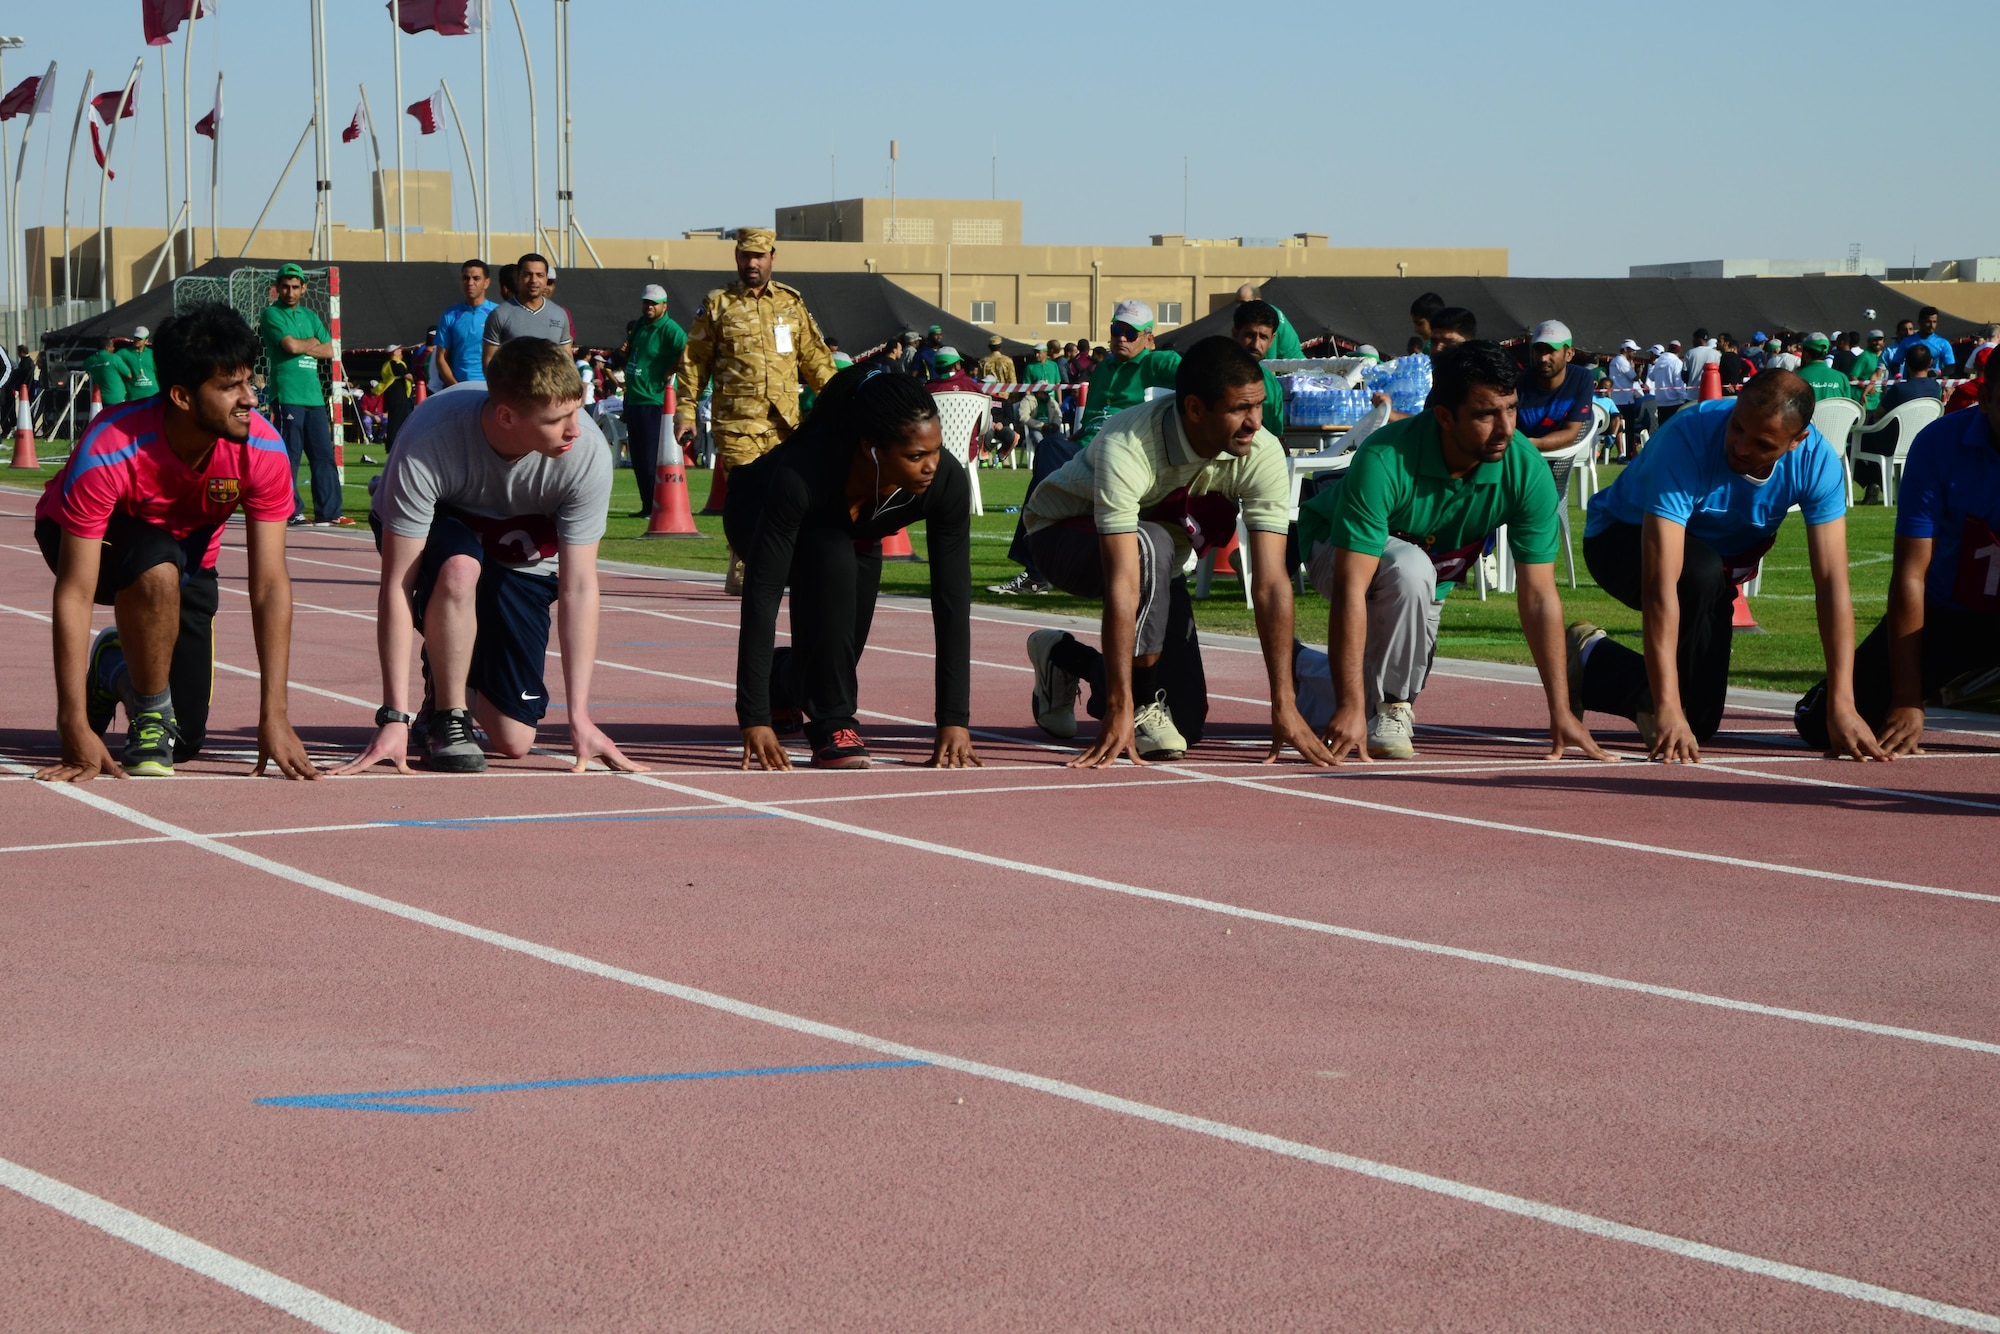 U.S. servicemembers and Qatar Emiri Air Force members line up before a 1000m run during Qatar National Sports Day, Feb. 10, 2015, at Al Udeid Air Base, Qatar. National Sports Day is a national holiday in Qatar, held annually since 2011 on the second Tuesday in February with the main objective being to promote a healthy lifestyle. (U.S. Air Force photo by Senior Airman Kia Atkins)